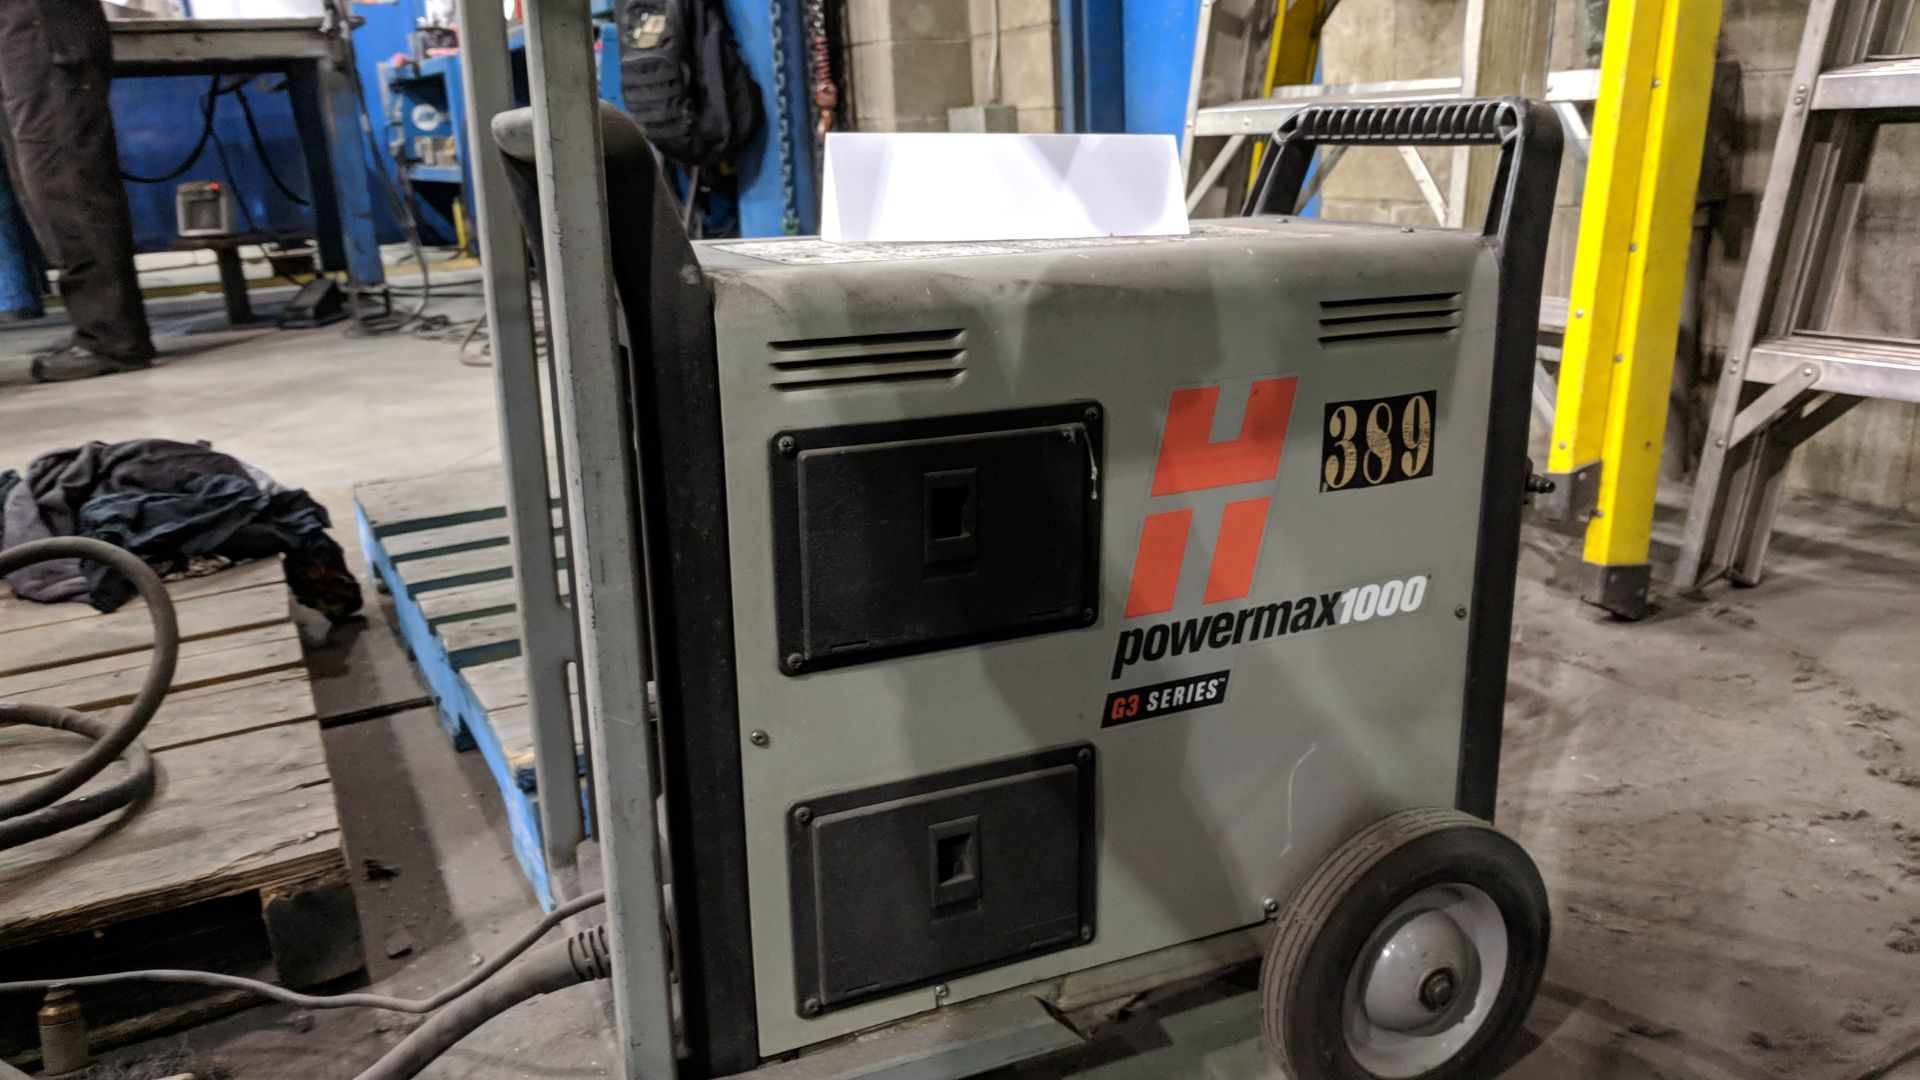 HYPERTHERM POWERMAX 1000 G3 SERIES PORTABLE PLASMA CUTTER WITH CABLES AND GUN, S/N N/A - Image 3 of 4